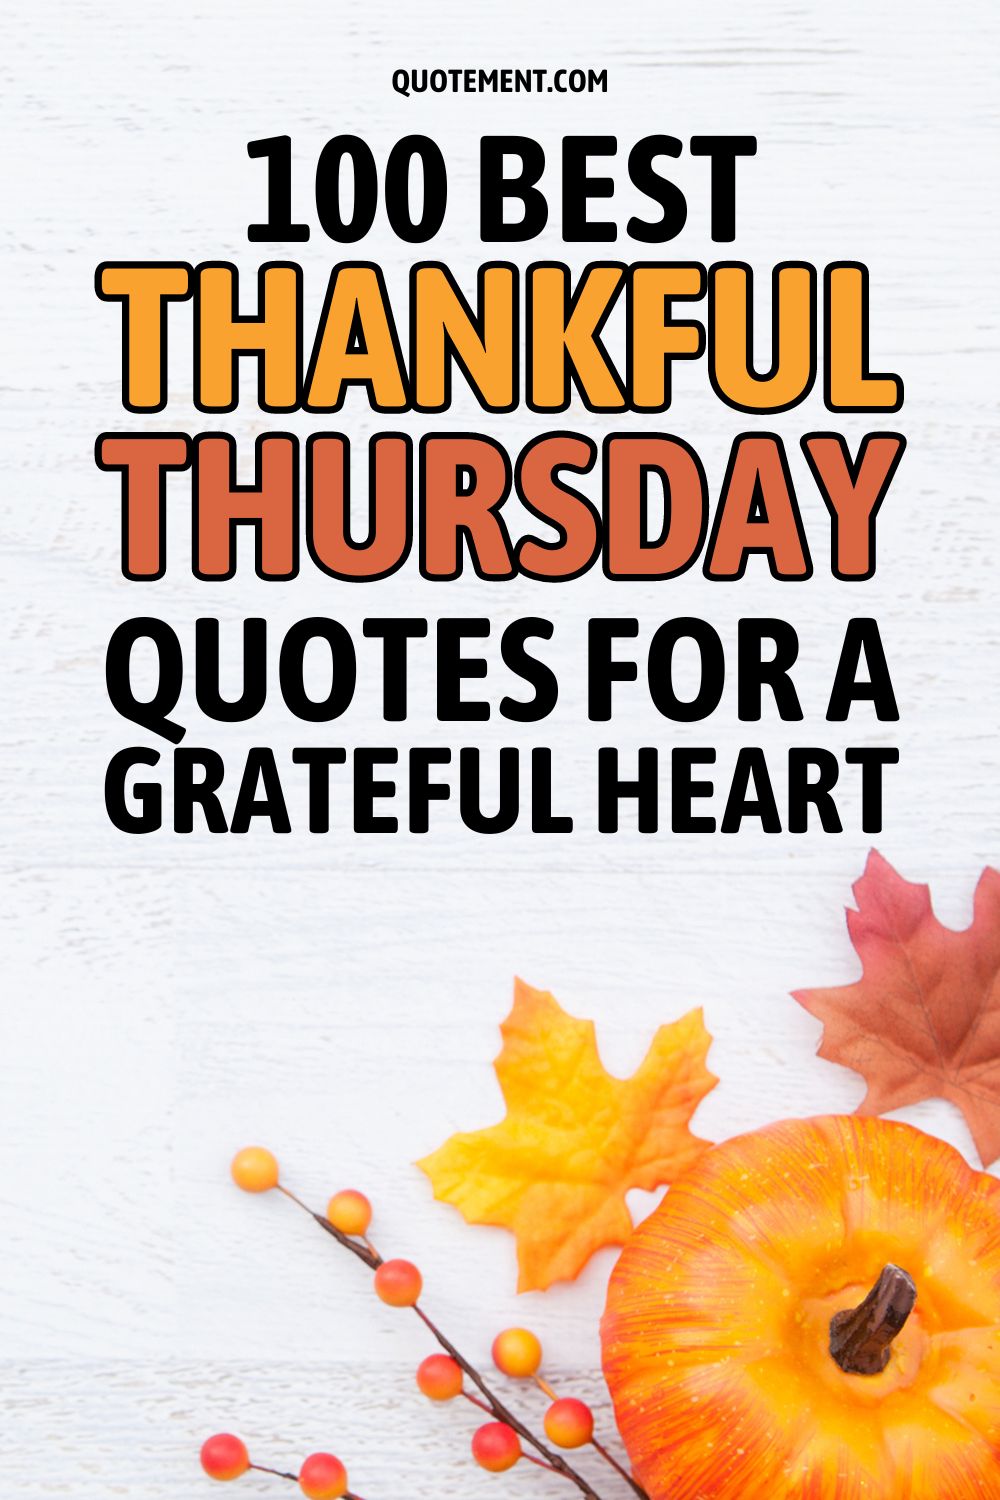 100 Best Thankful Thursday Quotes For A Grateful Heart 